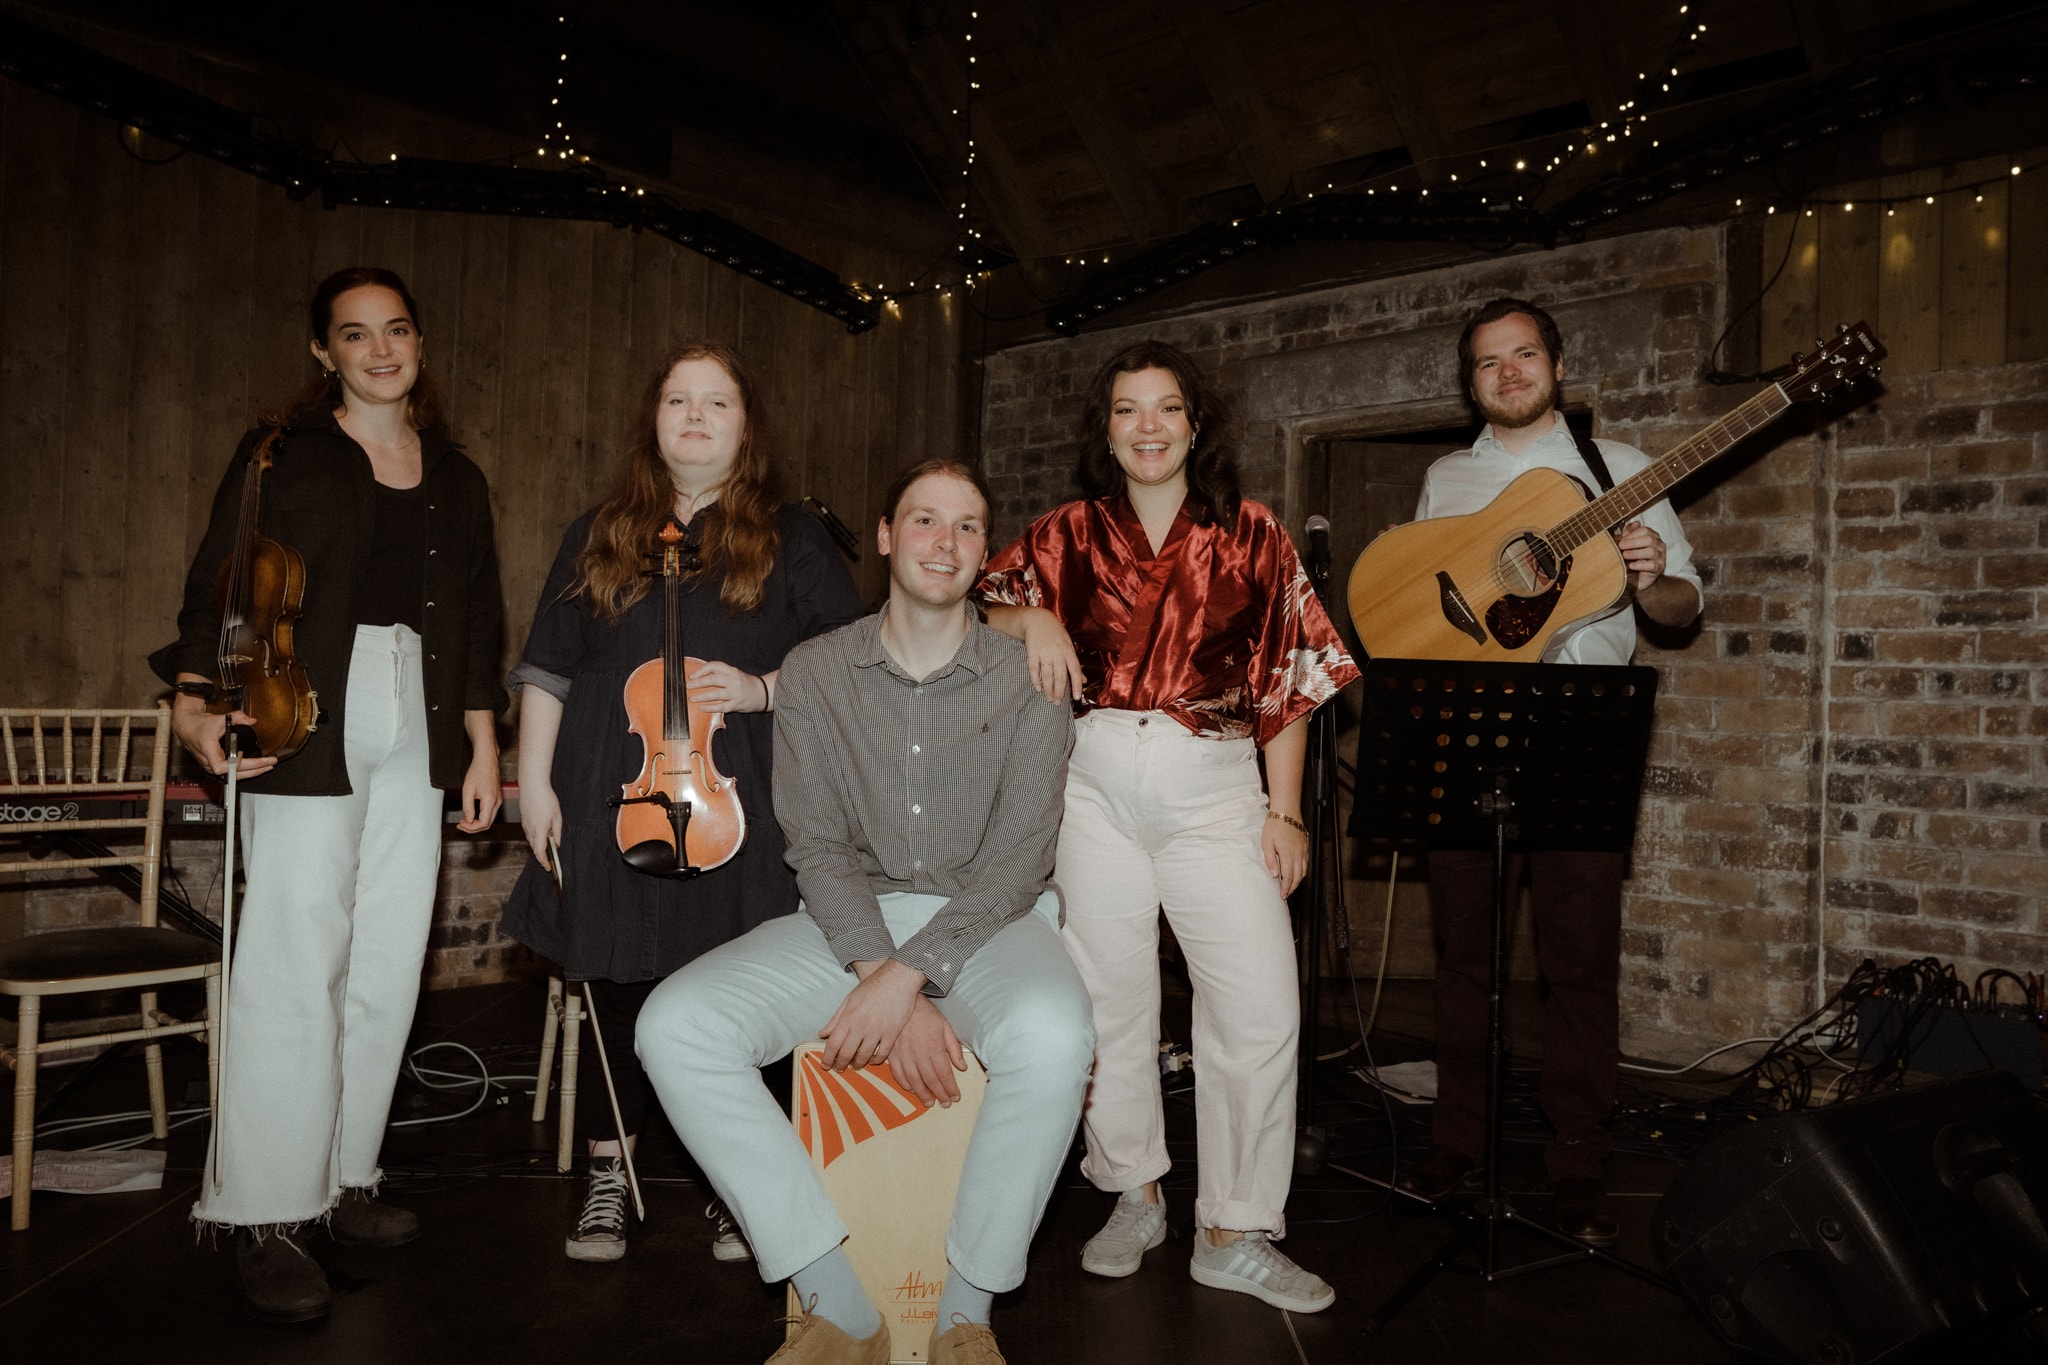 'Taigh Band' Create Fun-Filled Night & Unforgettable Celtic Experience